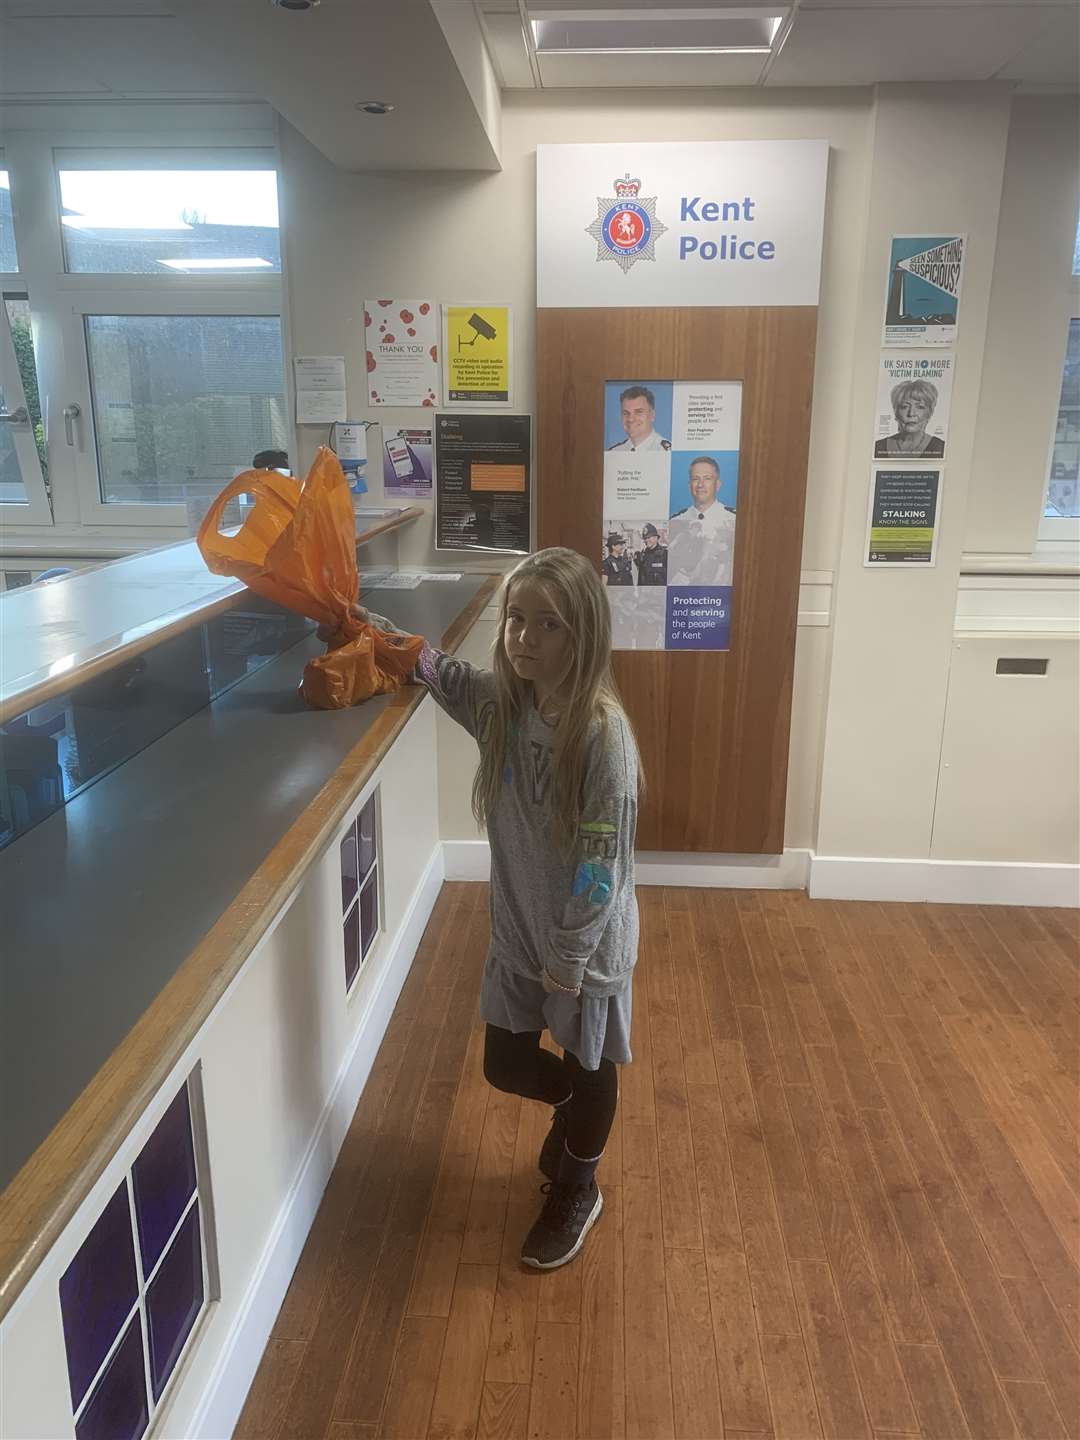 In December, Sahara Treeby handing over her savings to Kent Police to get her pony back